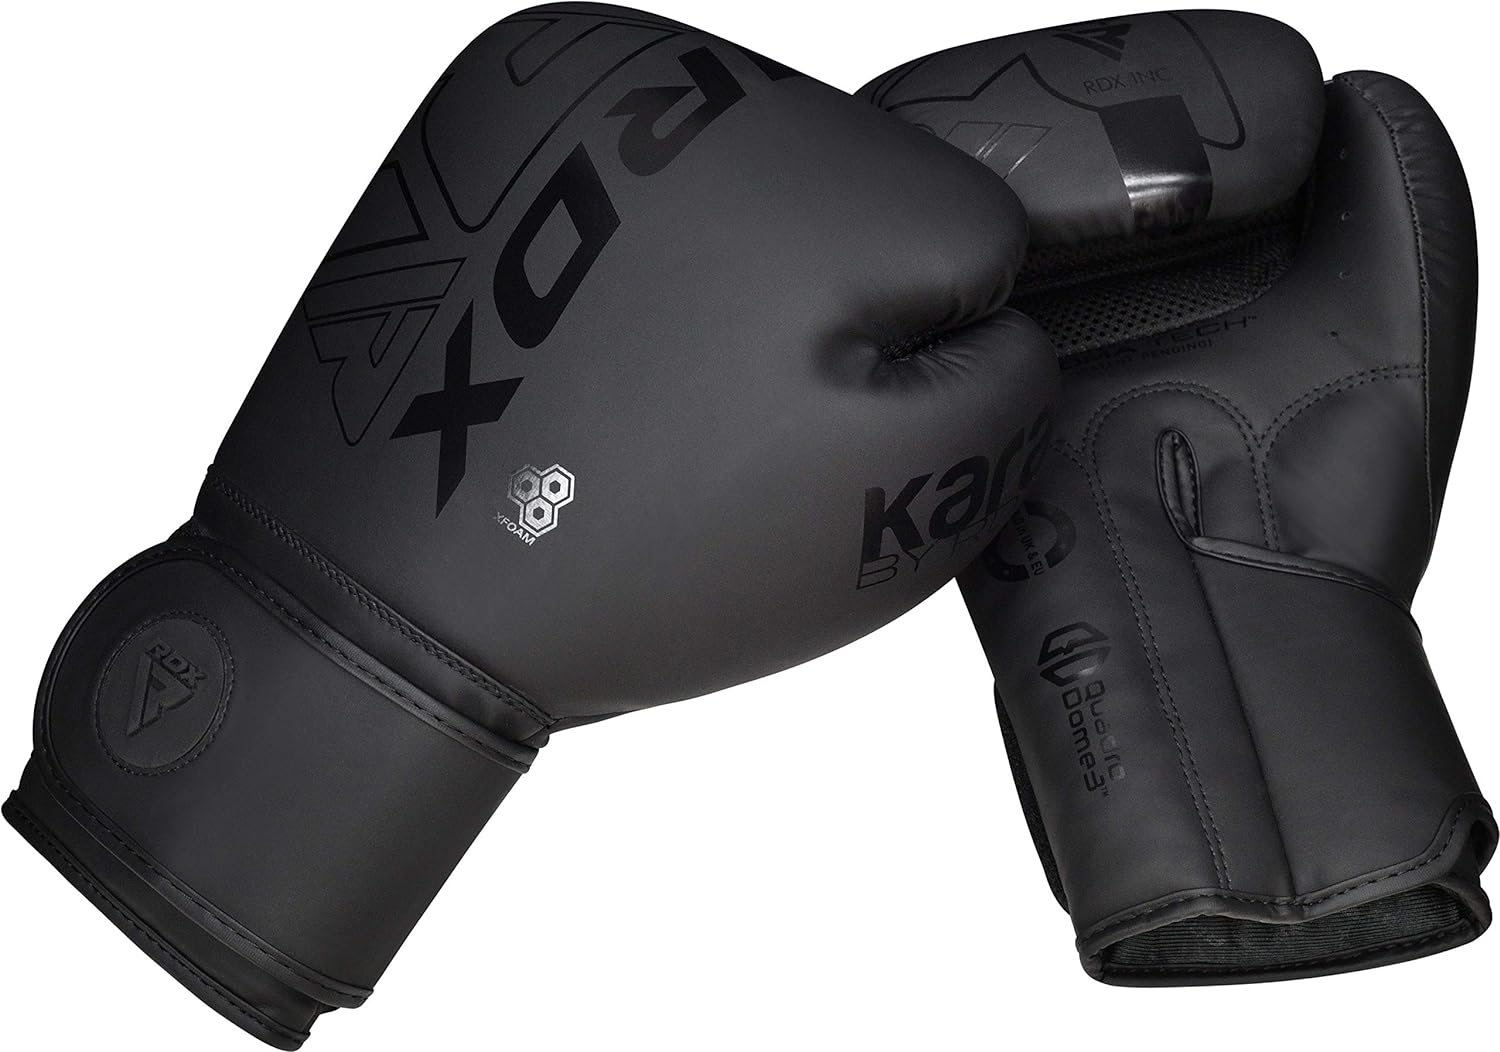 Eclipse Martial Art Supplies Training Gloves RDX Boxing Gloves Men Women, Pro Training Sparring, Maya Hide Leather Muay Thai MMA Kickboxing, Adult Heavy Punching Bag Gloves Mitts Focus Pad Workout, Ventilated Palm